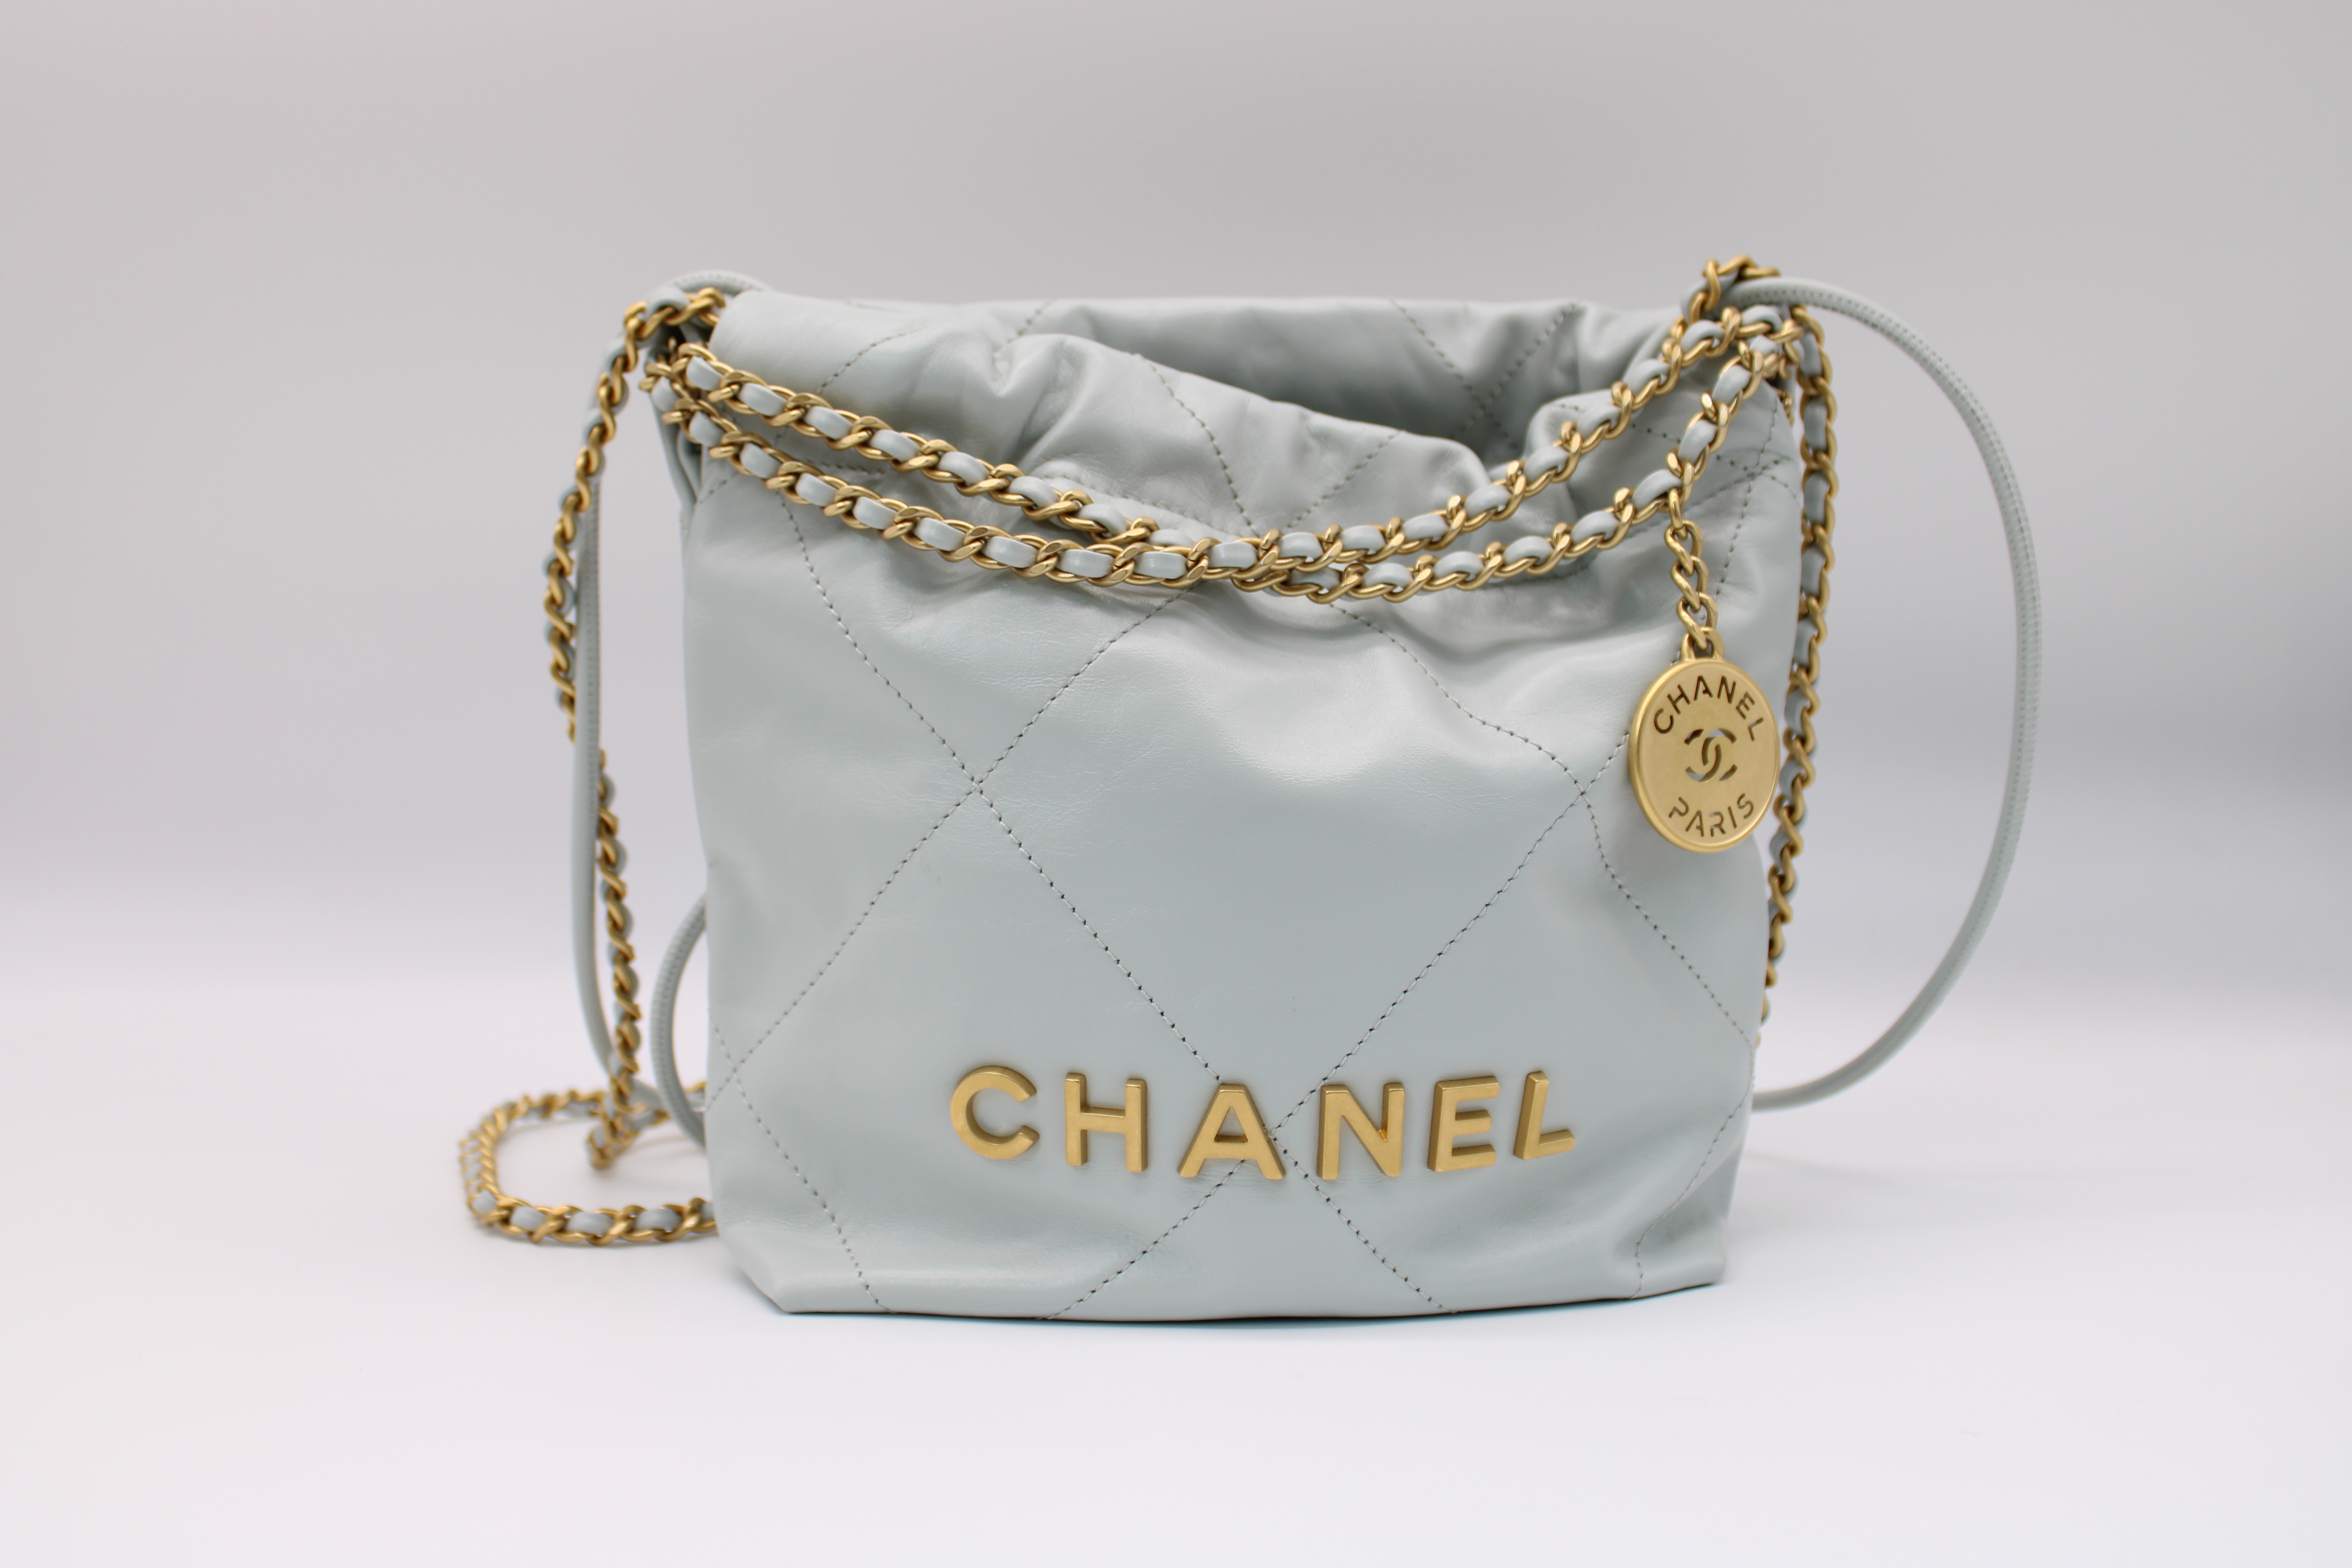 Chanel 22 leather mini bag Chanel Blue in Leather - 34278553